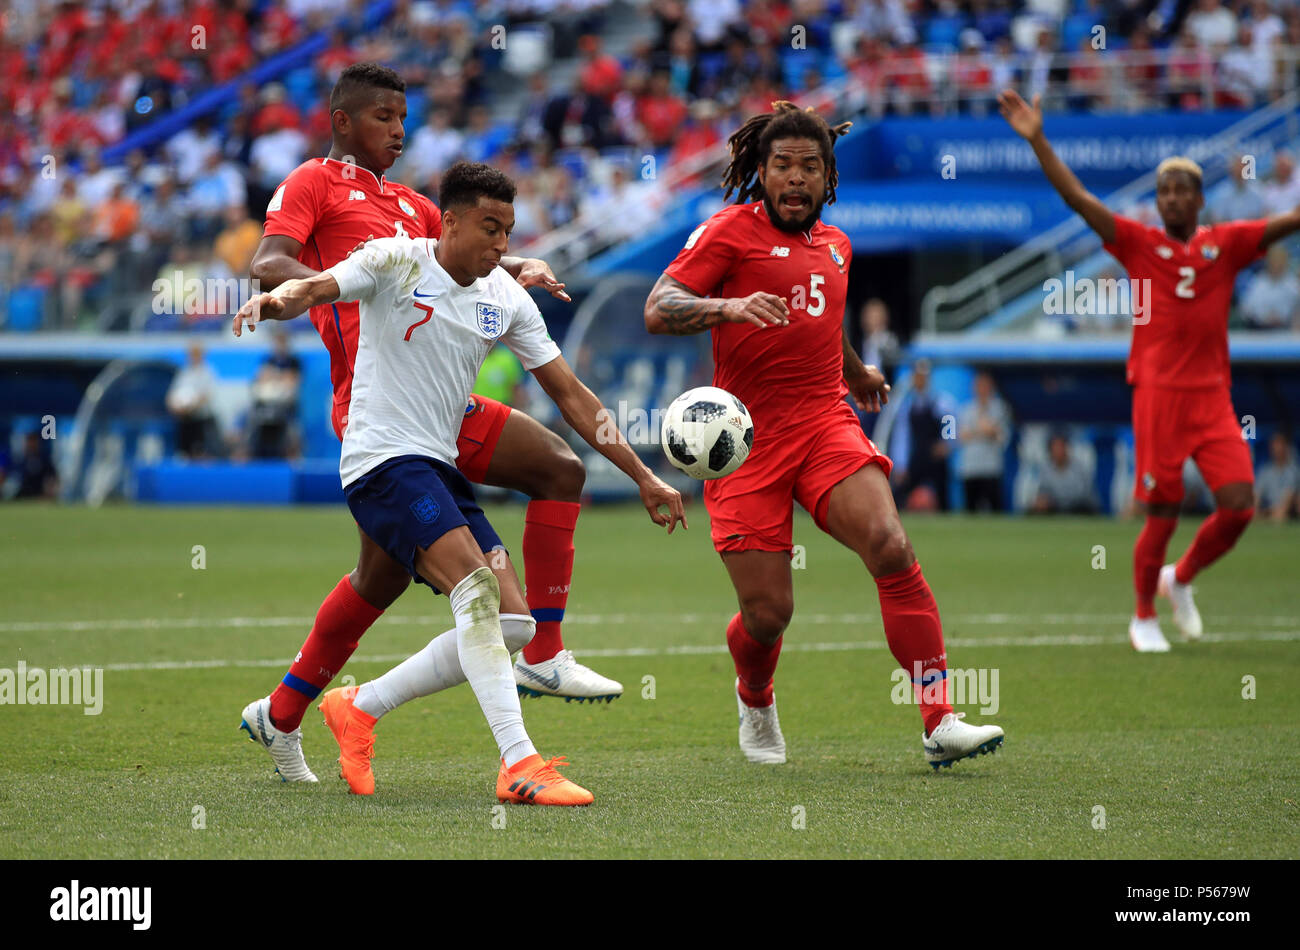 Panama's Fidel Escobar challenges England's Jesse Lingard for the ball and concedes a penalty during the FIFA World Cup Group G match at the Nizhny Novgorod Stadium Stock Photo